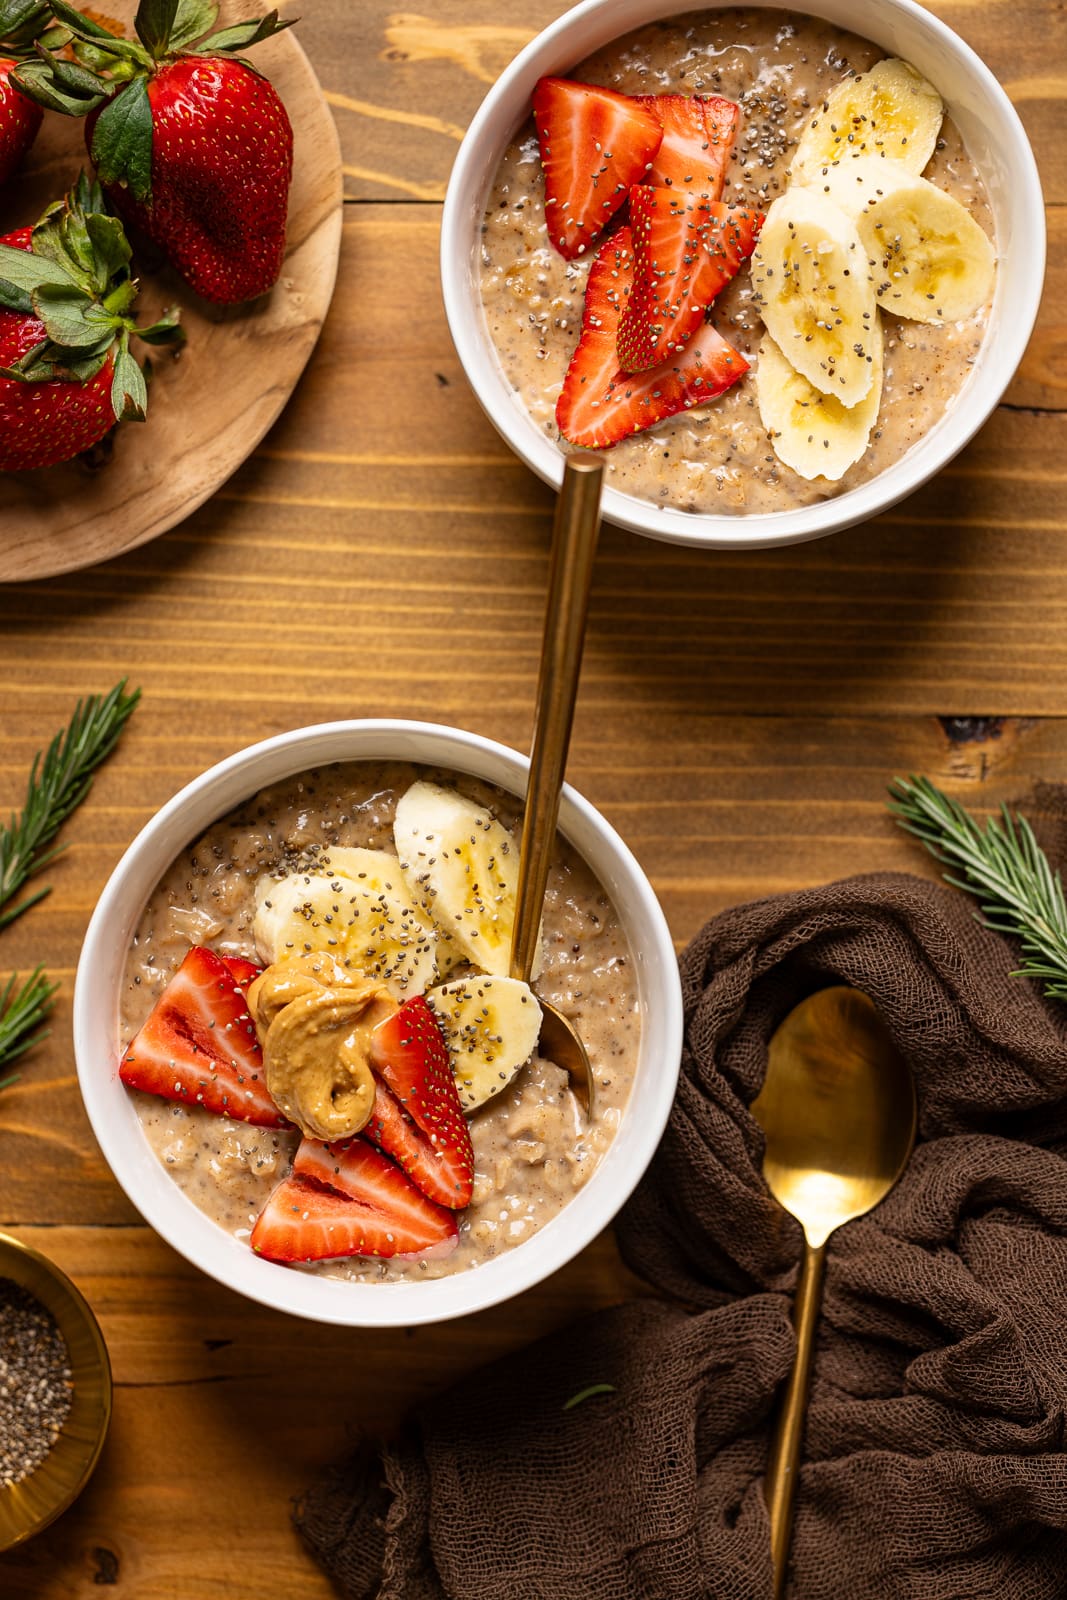 Two bowls of oatmeal with fruits and a spoon.